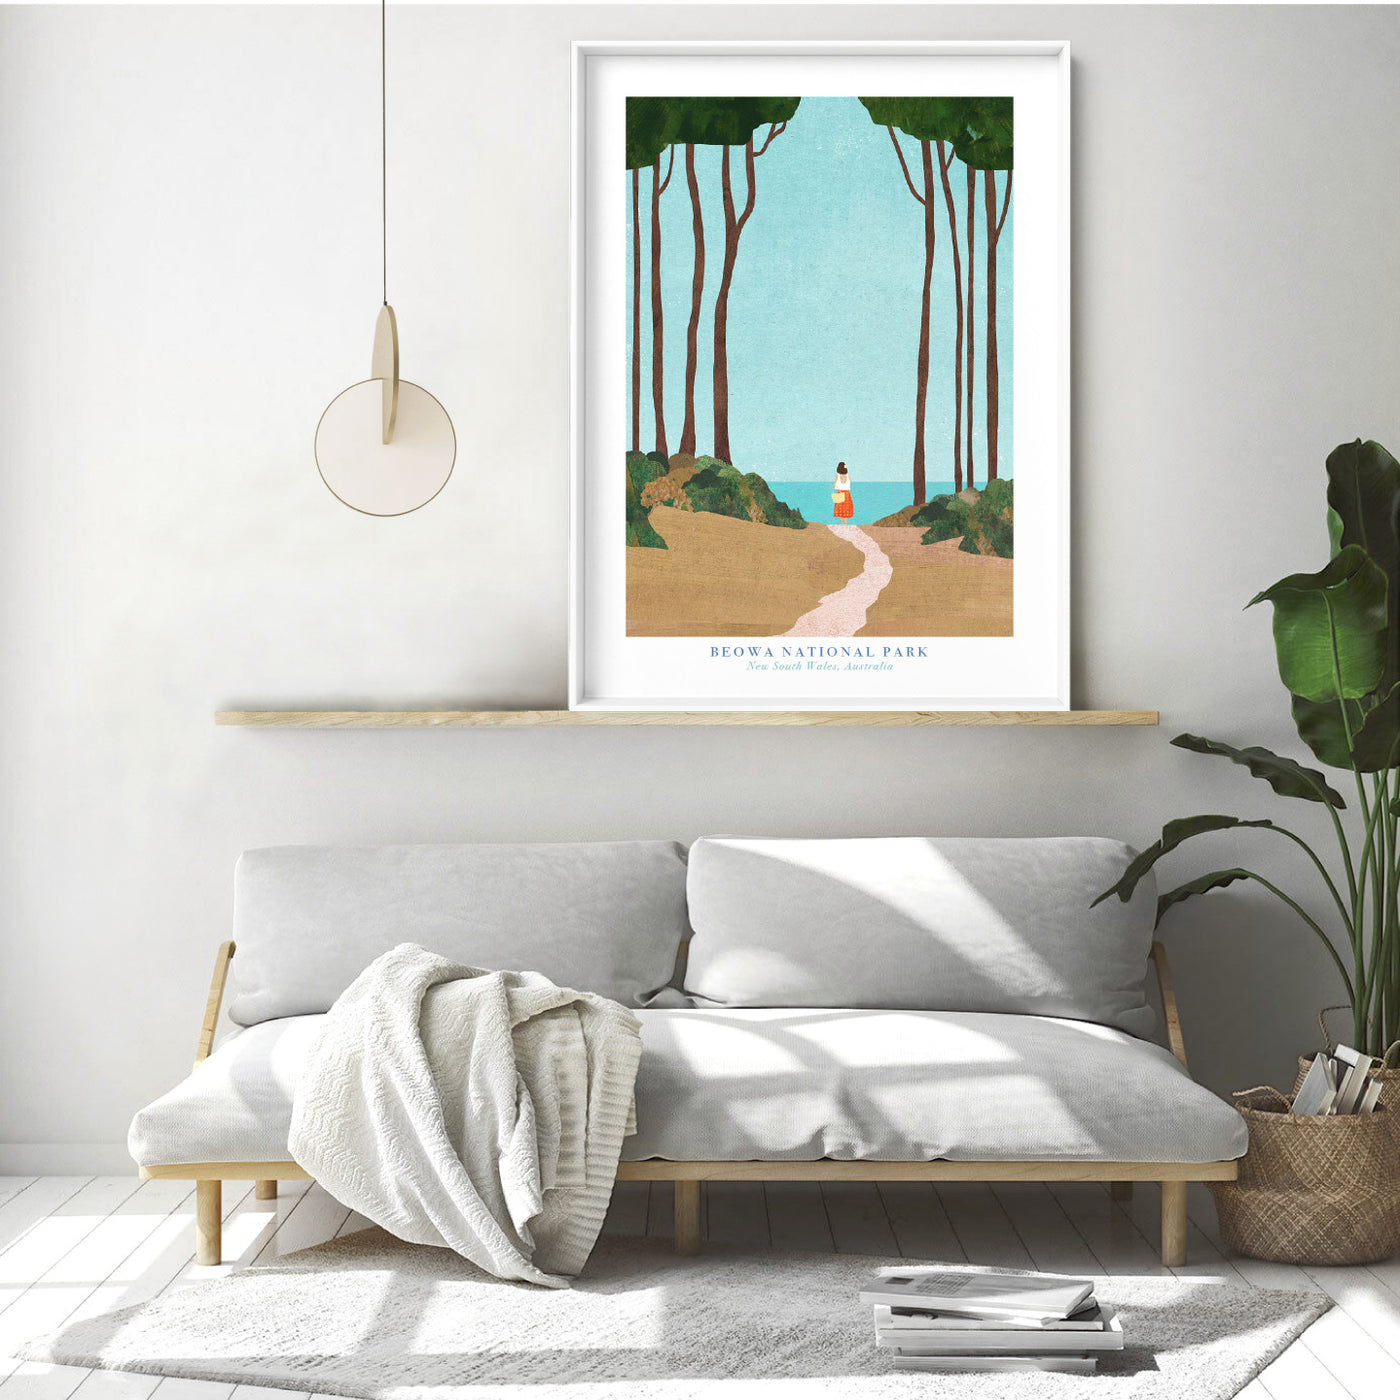 Beowa National Park Illustration - Art Print by Henry Rivers, Poster, Stretched Canvas or Framed Wall Art Prints, shown framed in a room